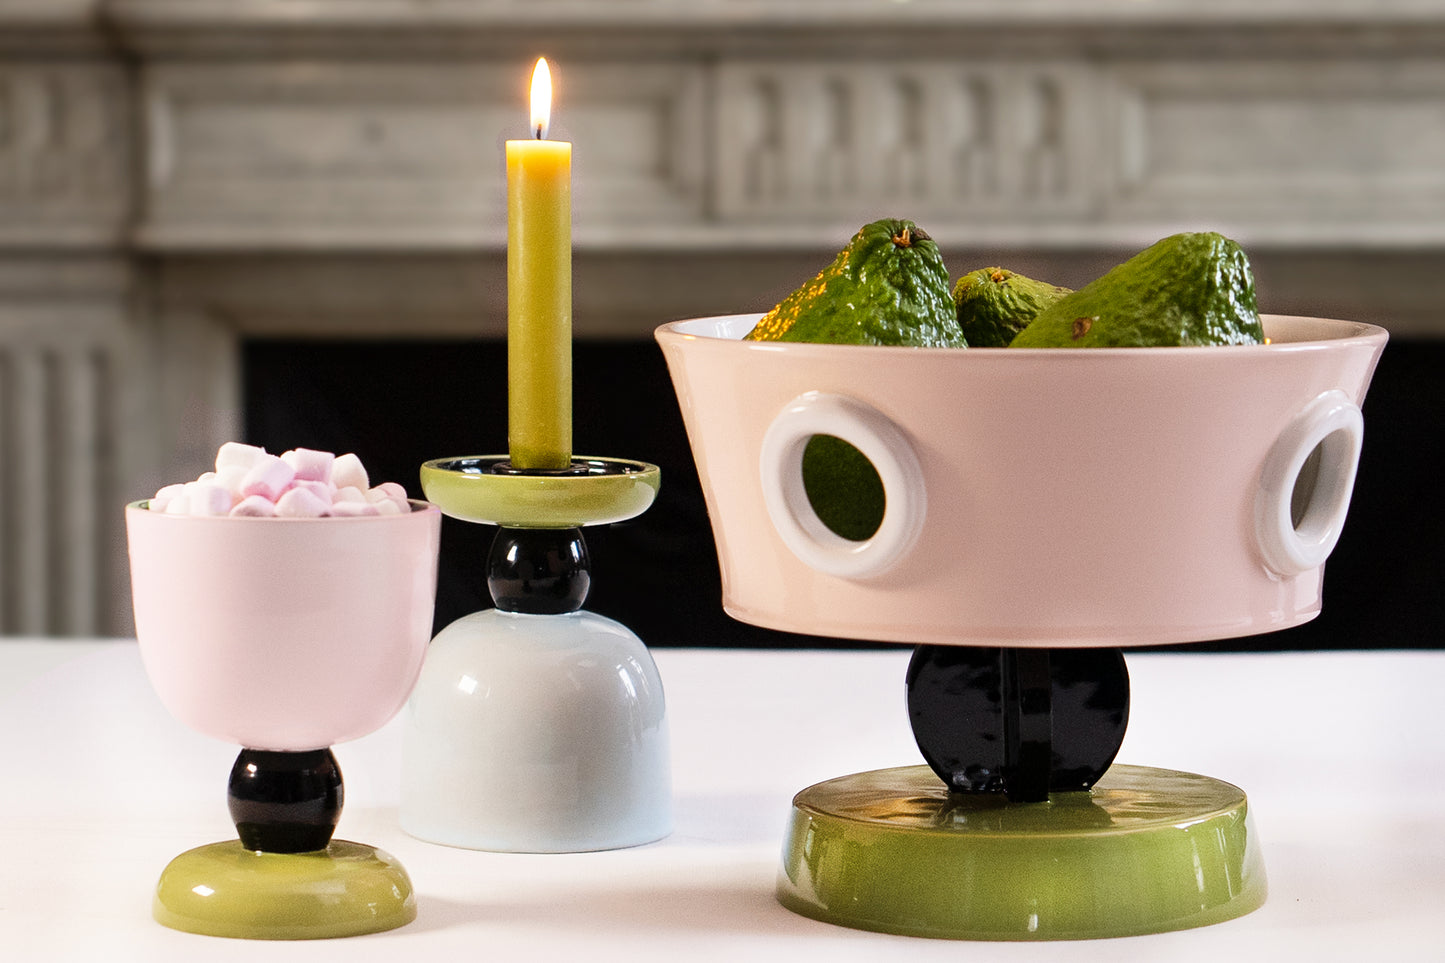 Objects designed by Olivier Gagnère exclusively for Waww